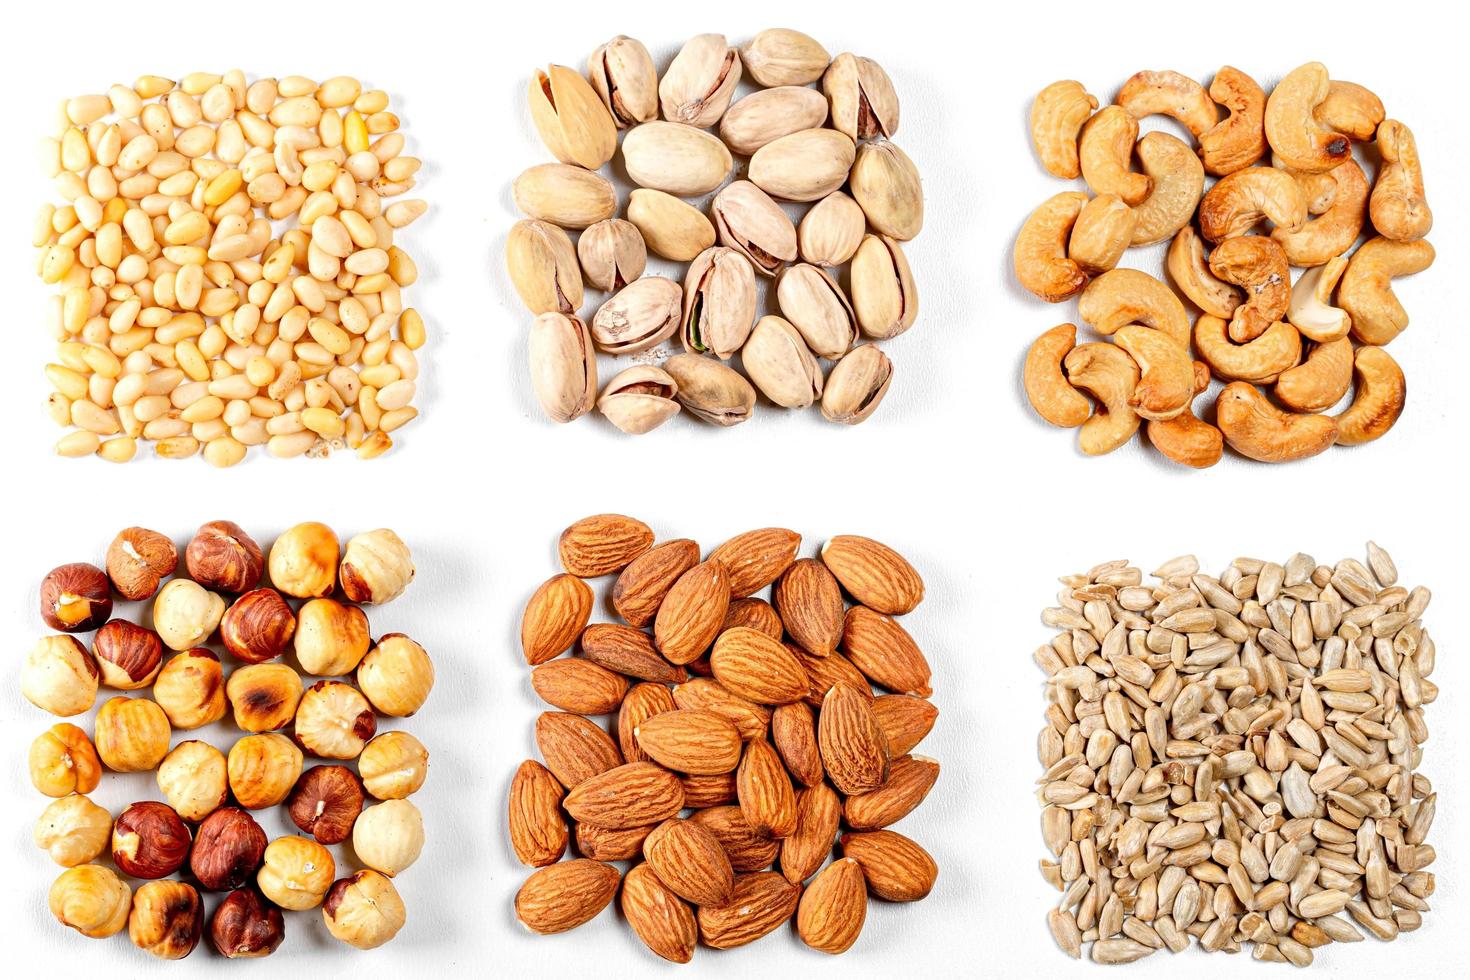 Cashew nuts, pistachios, pine nuts, almonds, hazelnuts and sunflower seeds on a white background photo